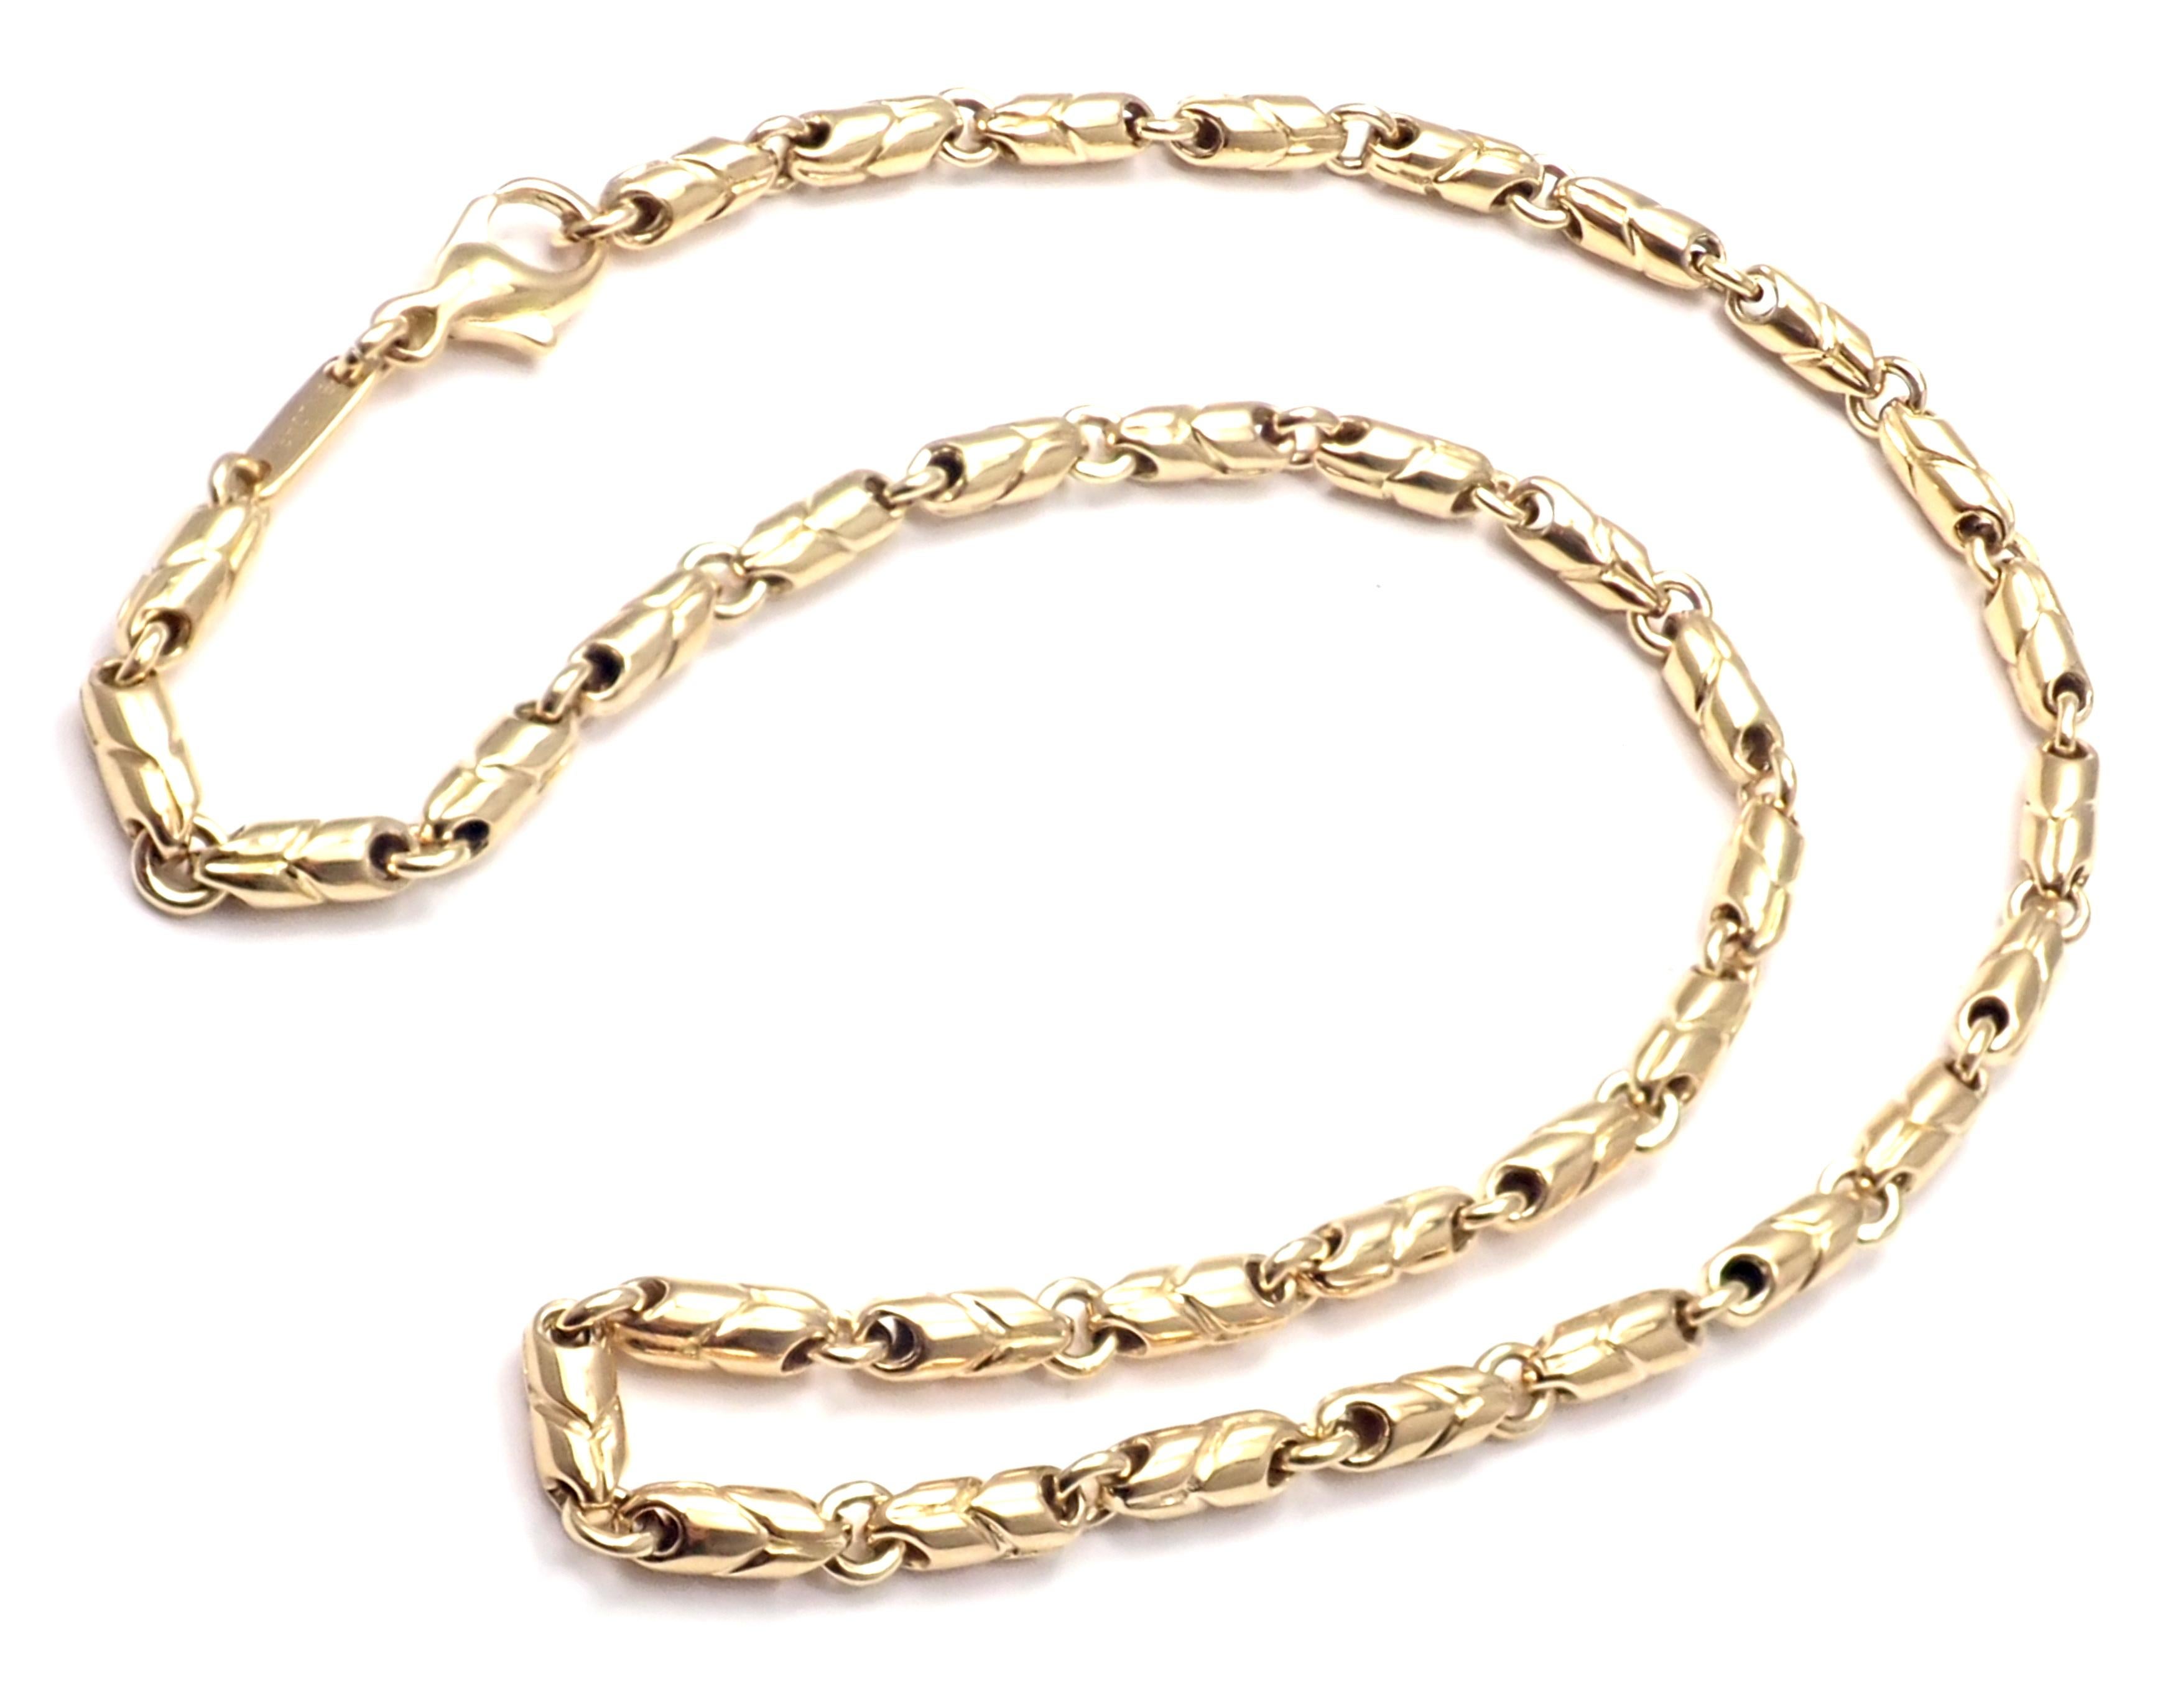 18k Yellow Gold Link Chain Necklace by Bulgari.
Details:
Length: 16